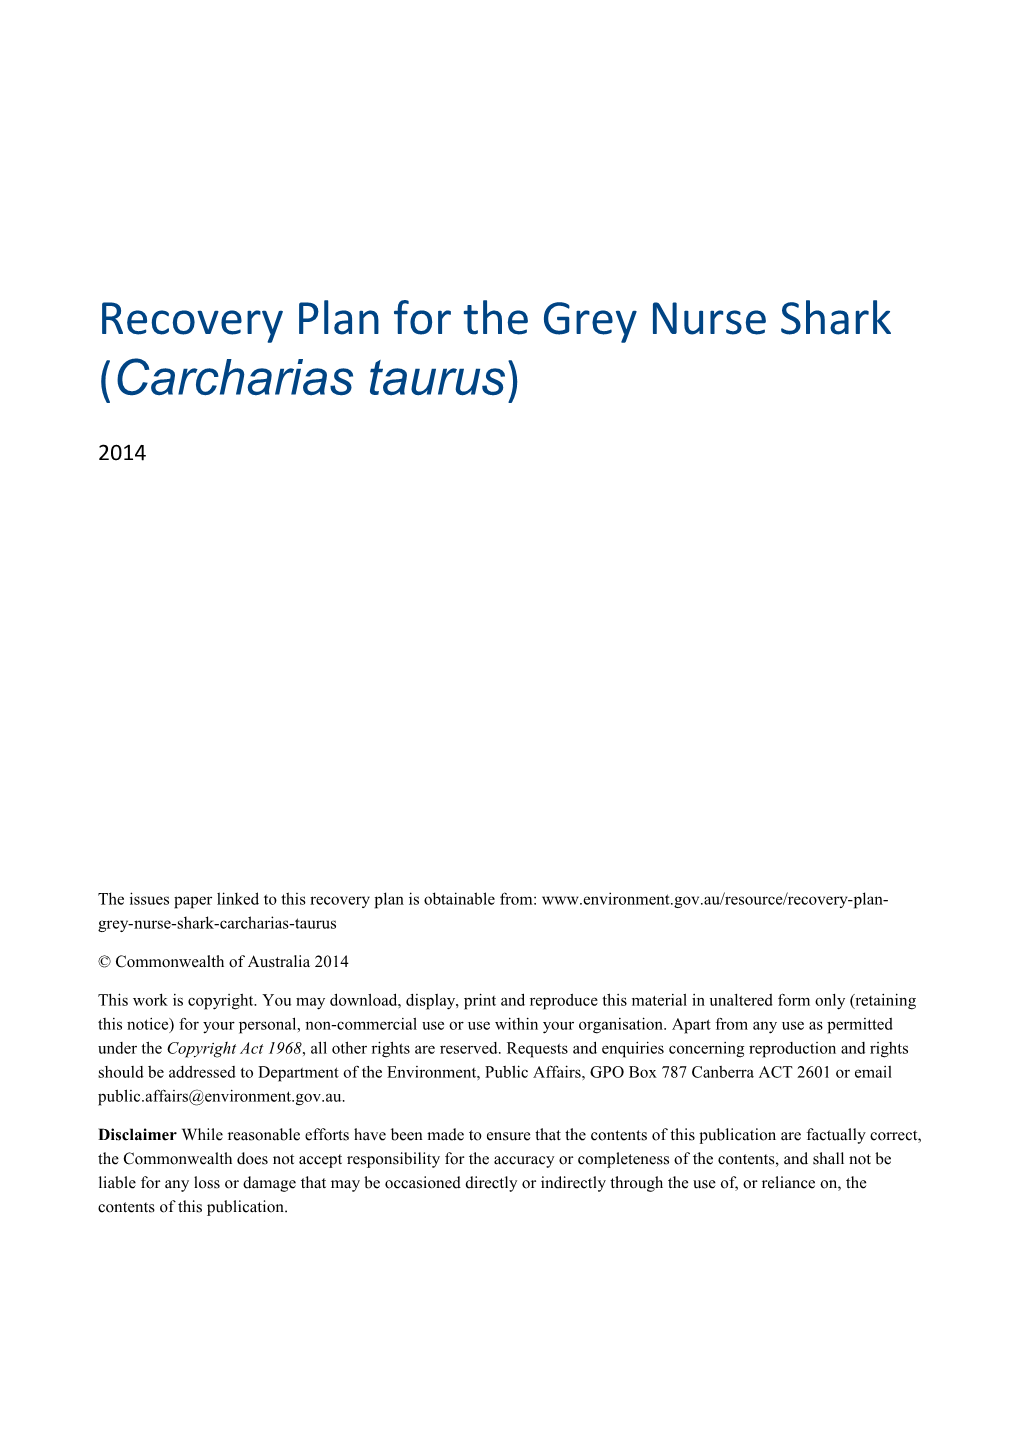 Recovery Plan for the Grey Nurse Shark (Carcharias Taurus)